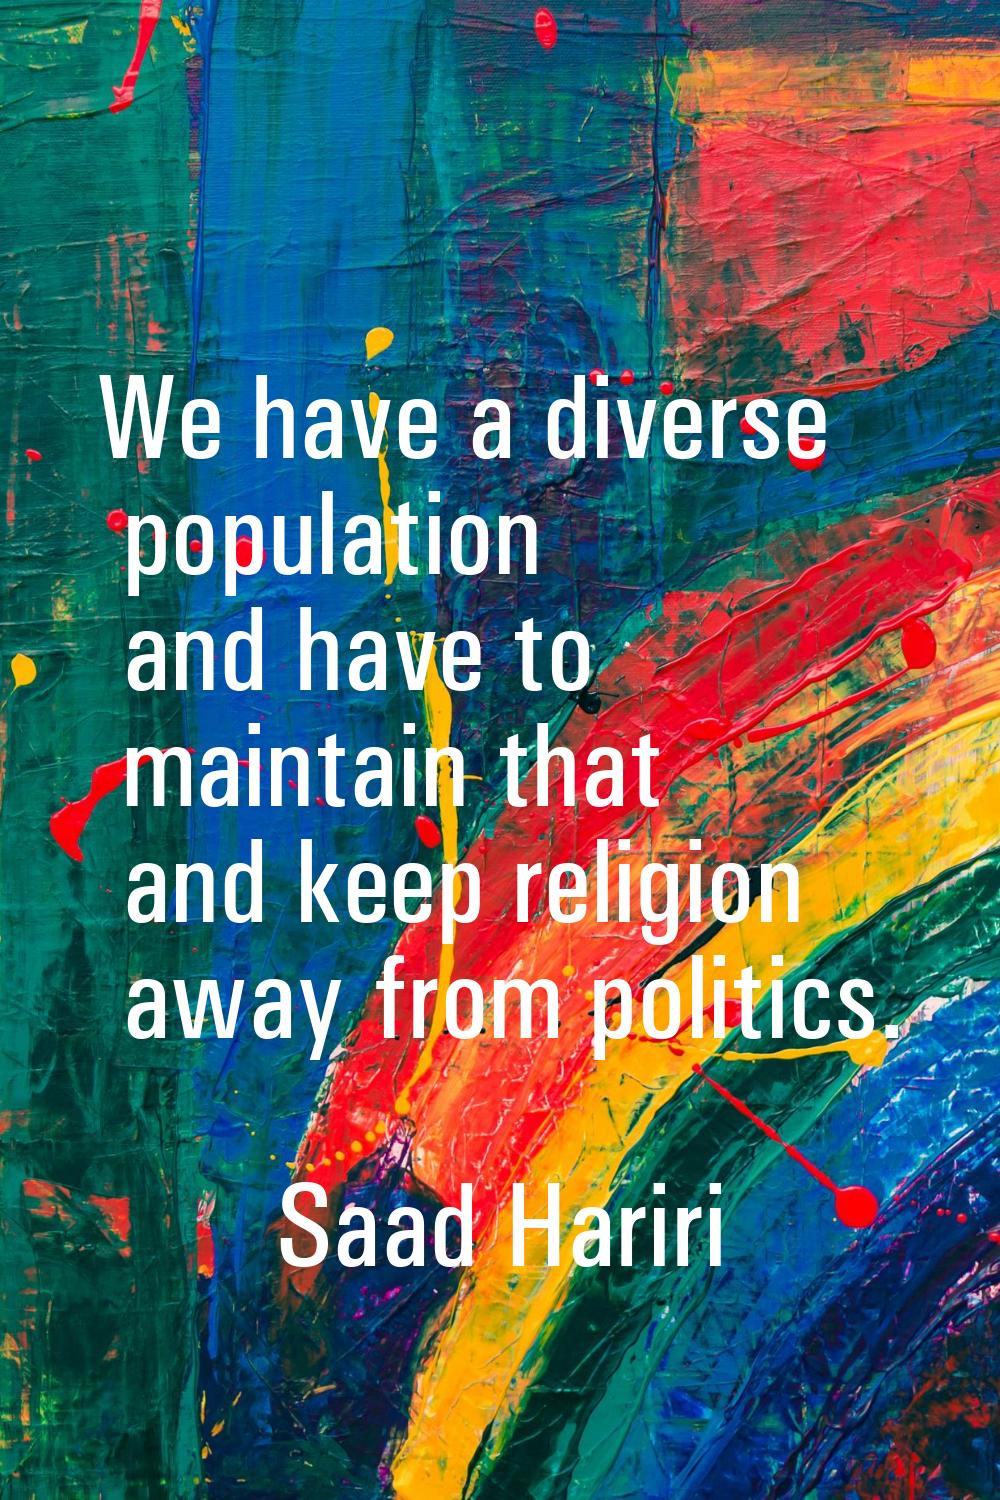 We have a diverse population and have to maintain that and keep religion away from politics.